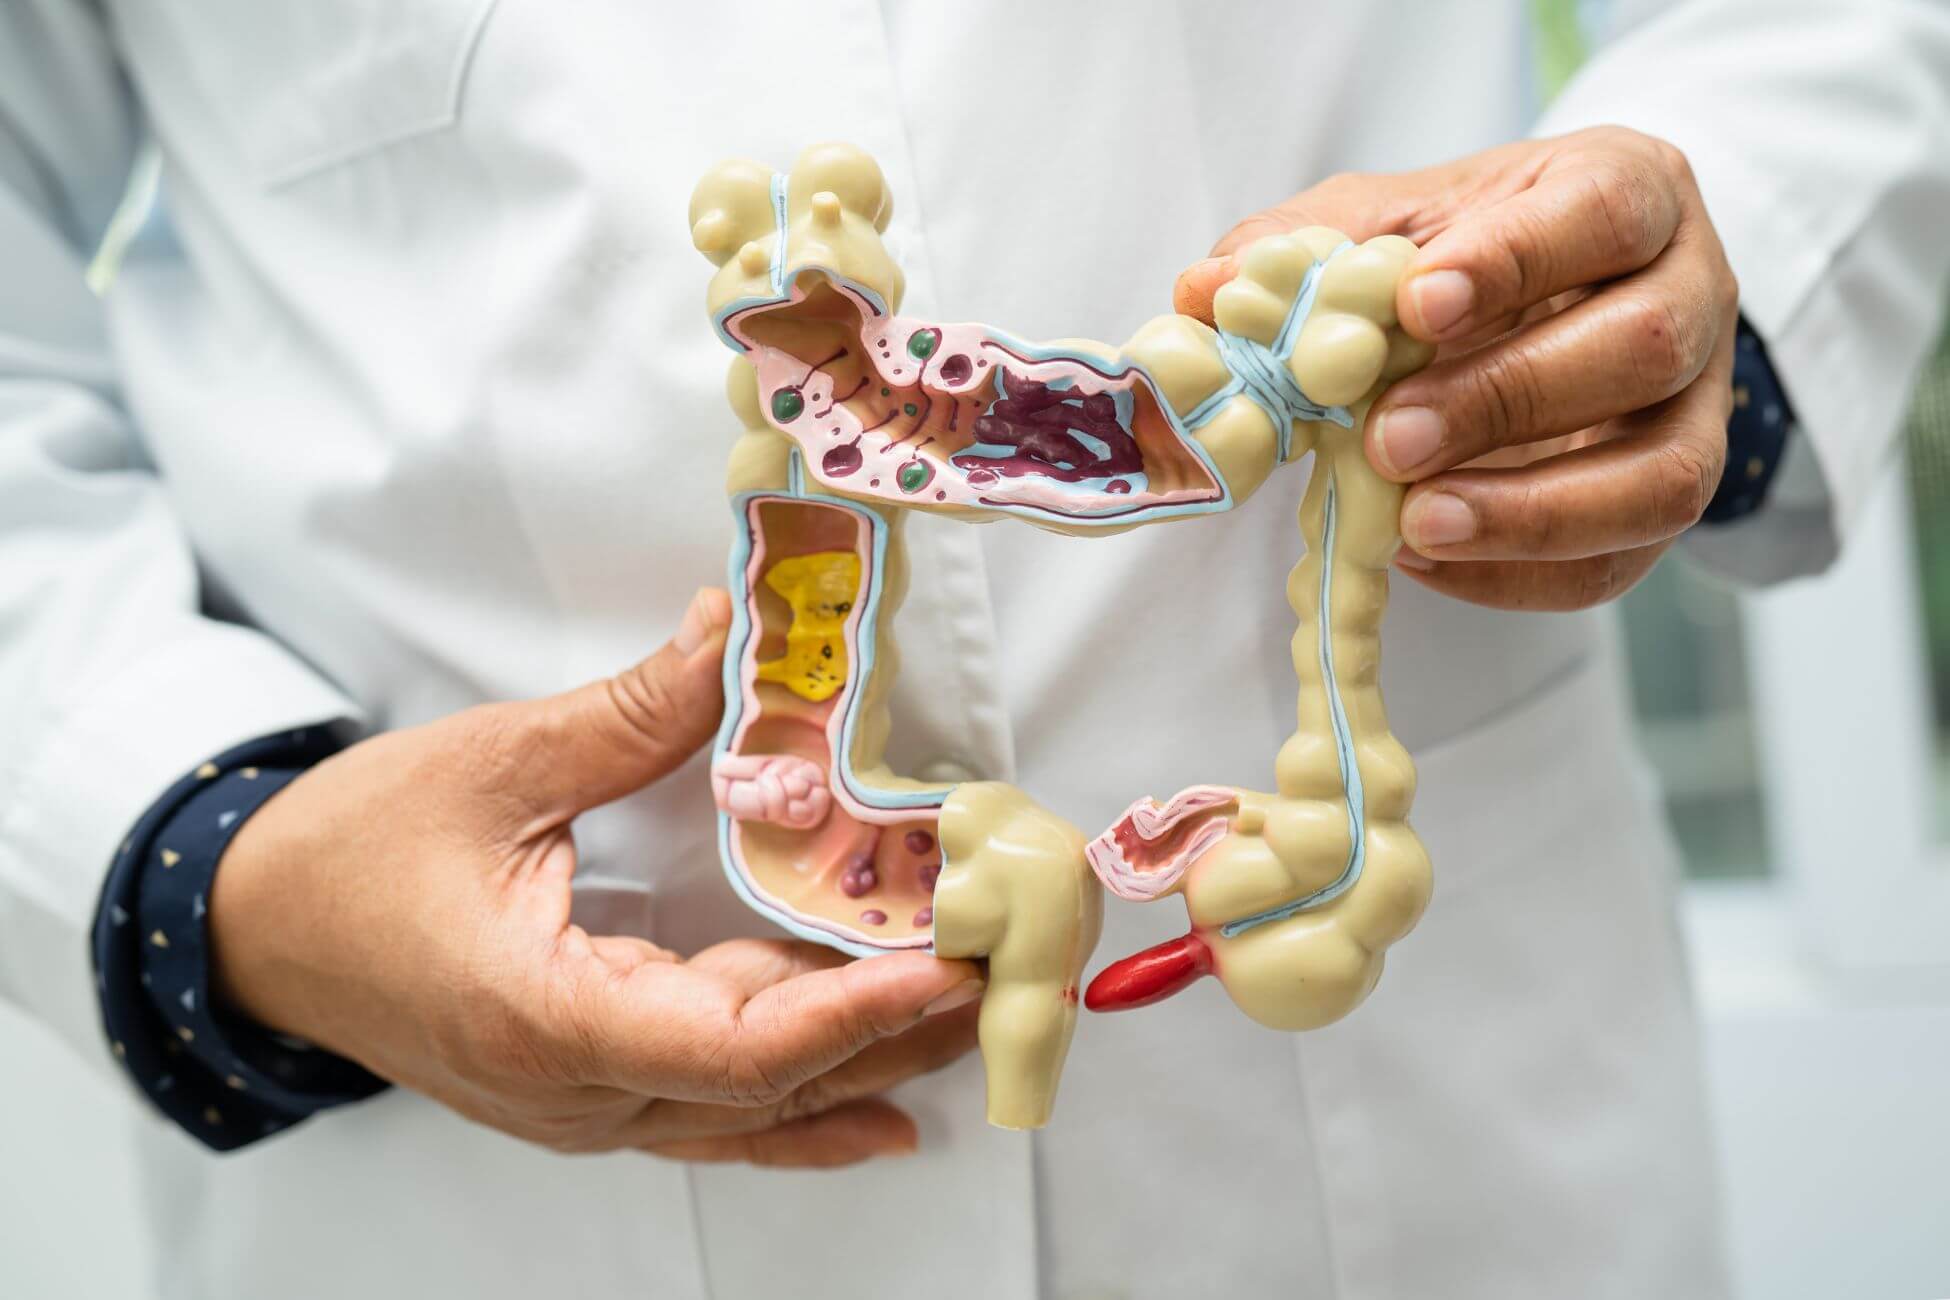 A person in a white lab coat holds a detailed anatomical model of the human colon, displaying healthy and unhealthy tissue sections.